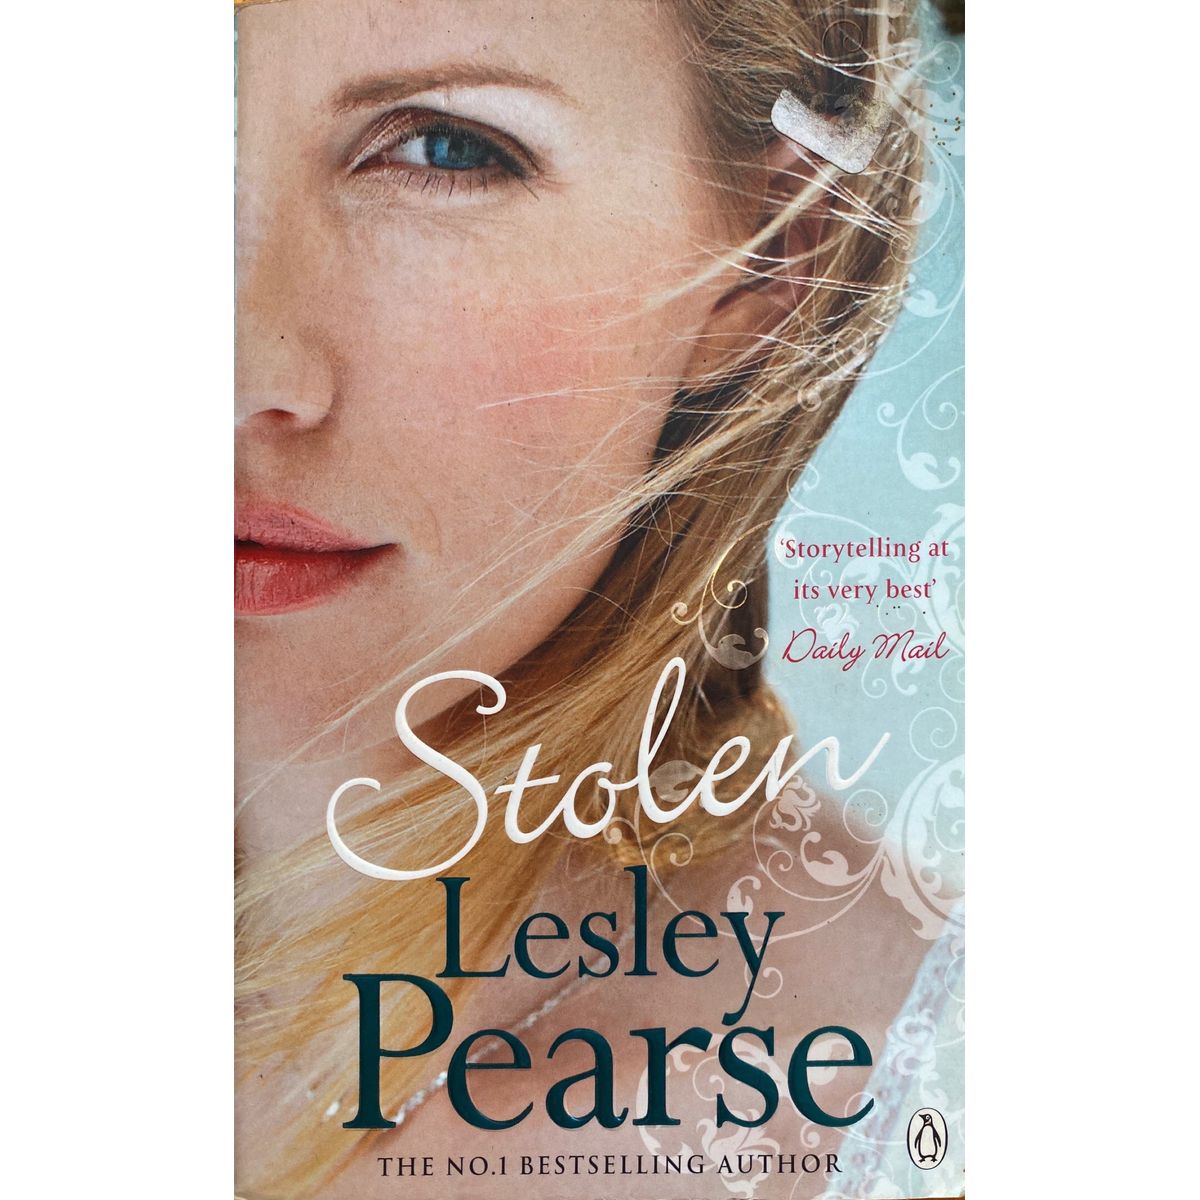 ISBN: 9781405913287 / 1405913282 - Stolen by Lesley Pearse [2012]